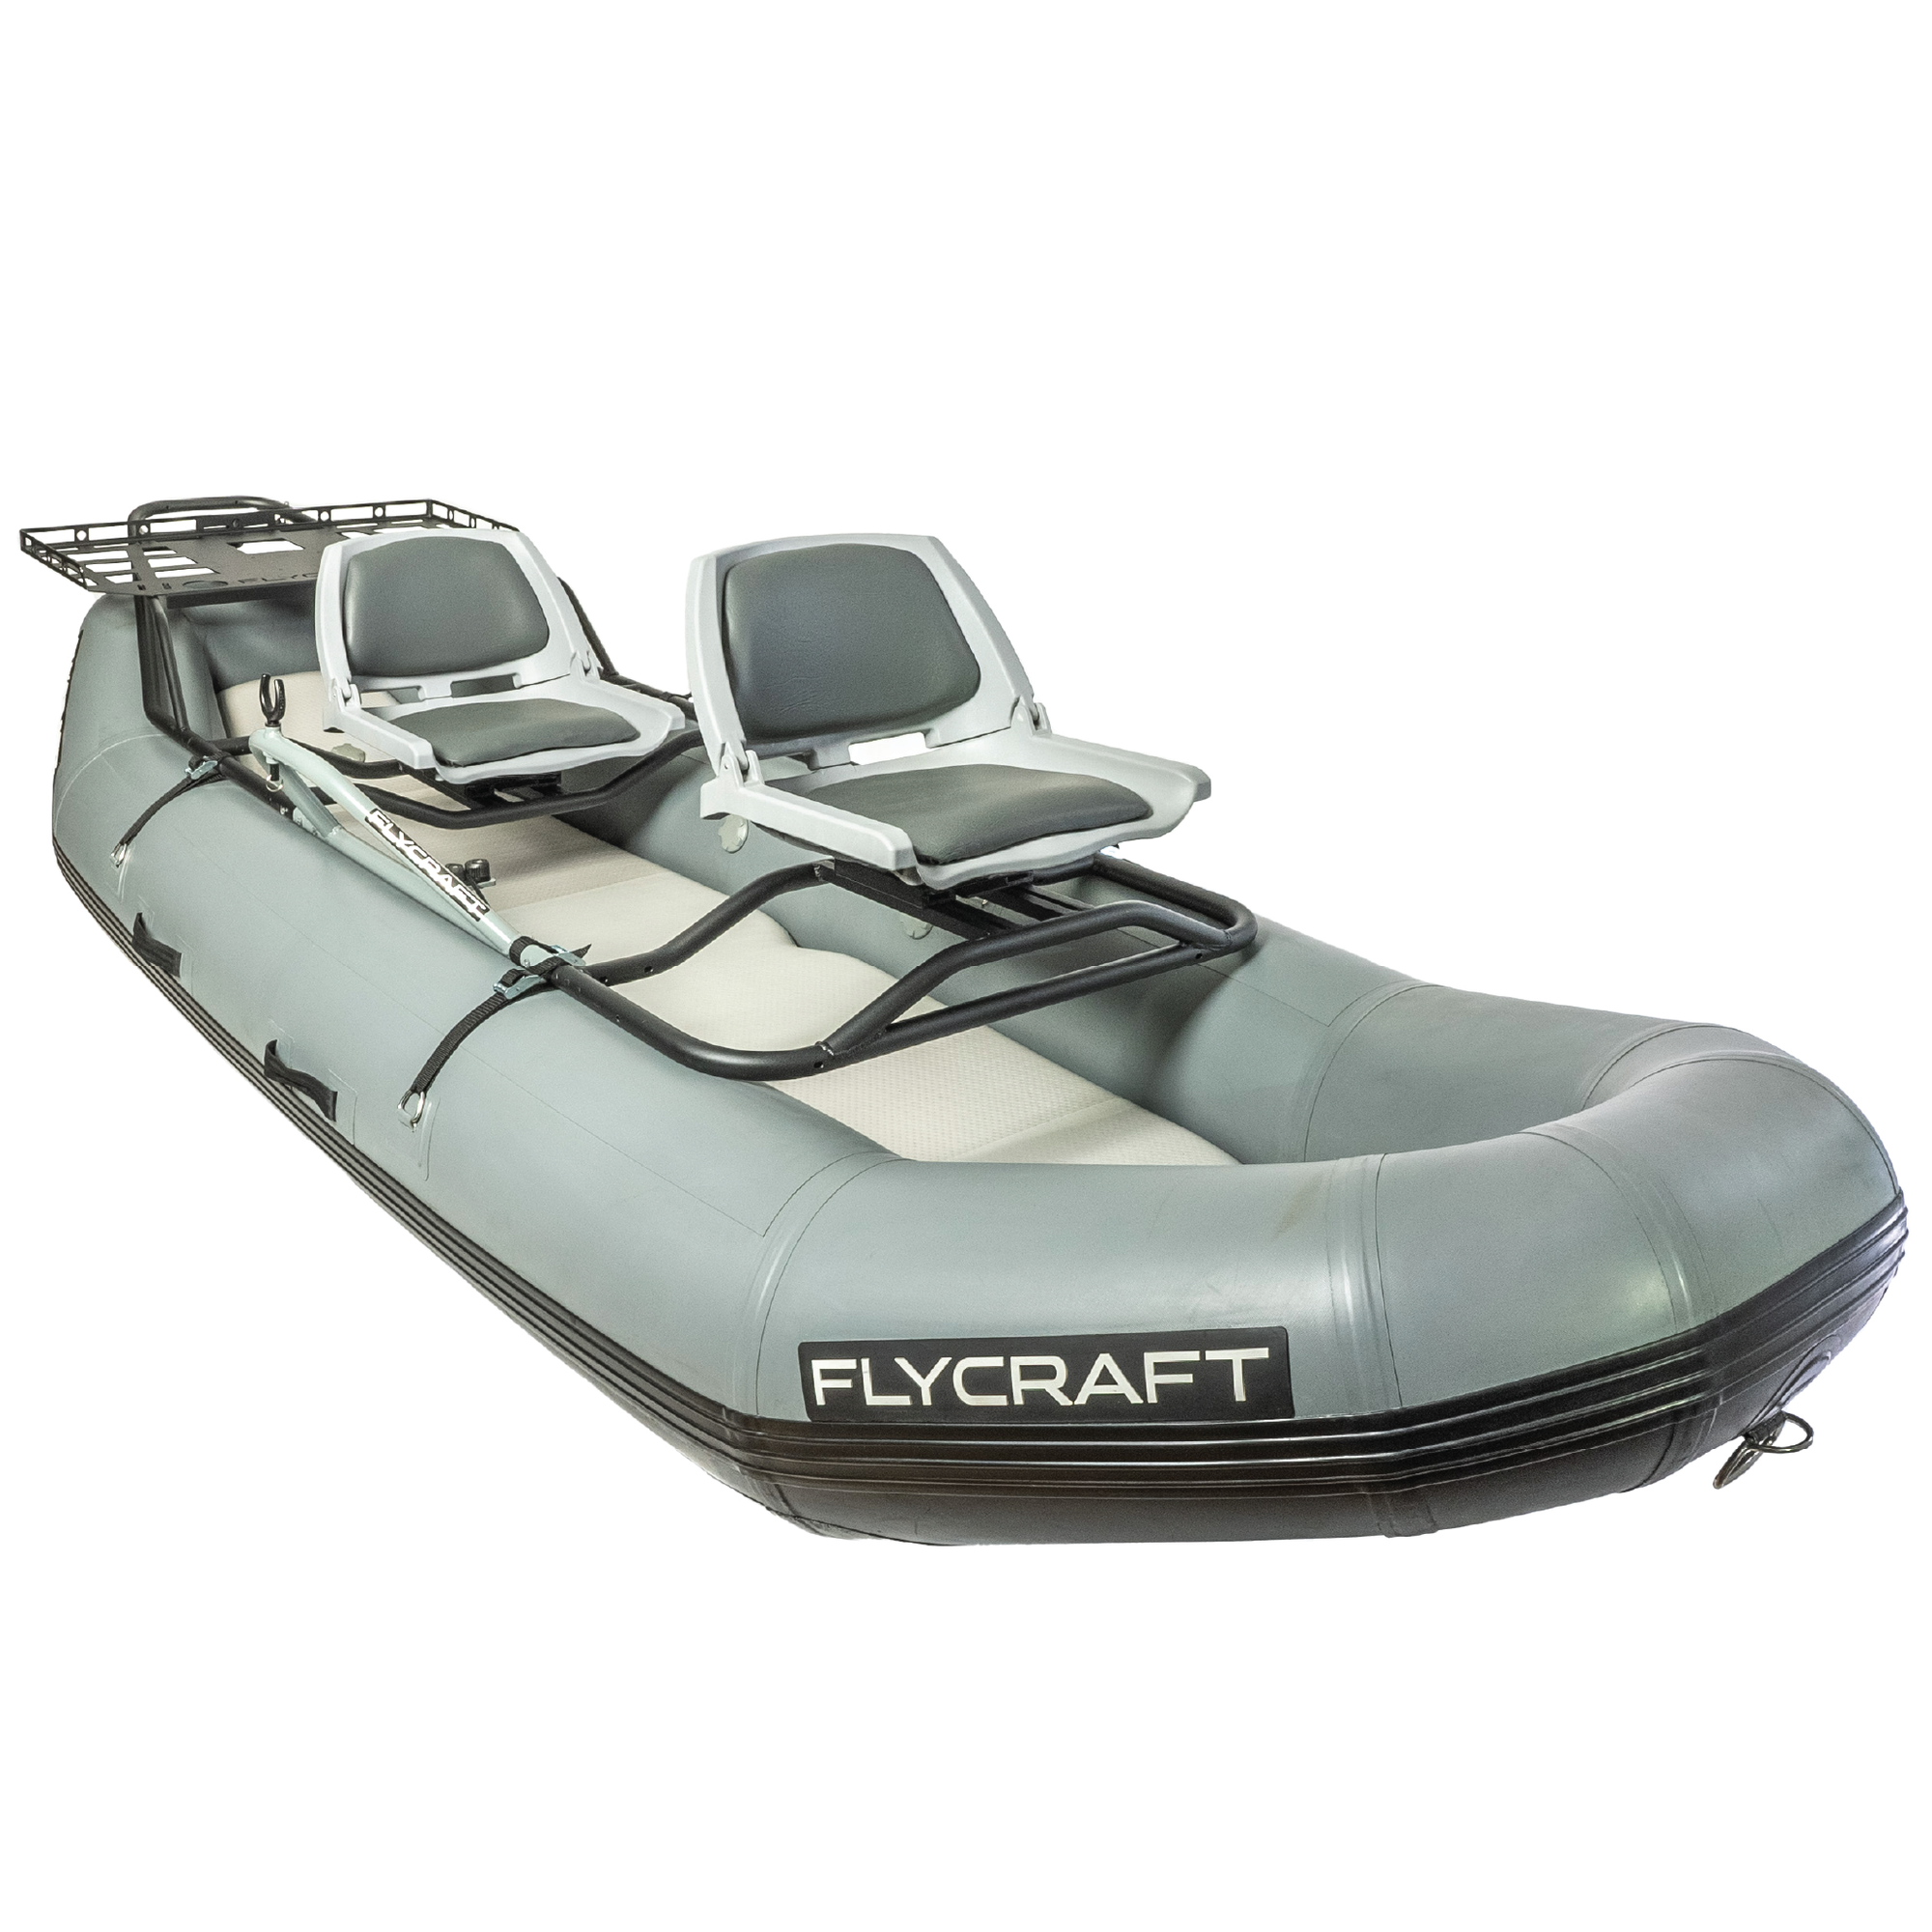 Inflatable Boats Manufacturer,Cheap Inflatable Fishing Boat For